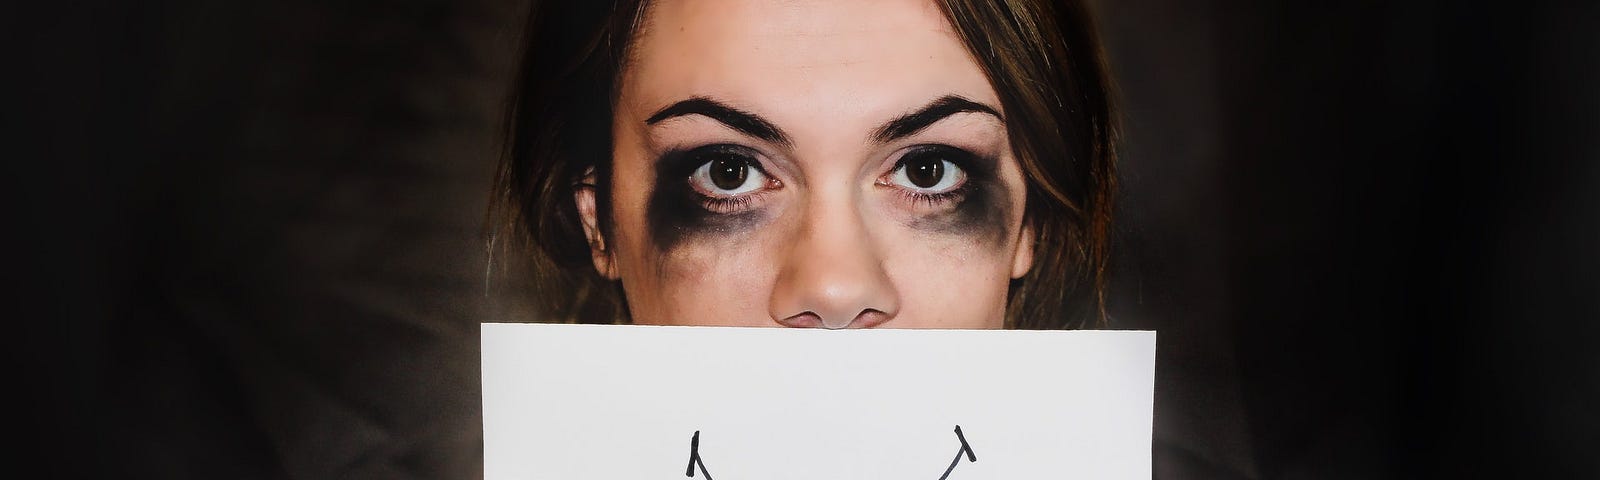 Woman with smeared mascara holds a drawing of a smile in front of her face